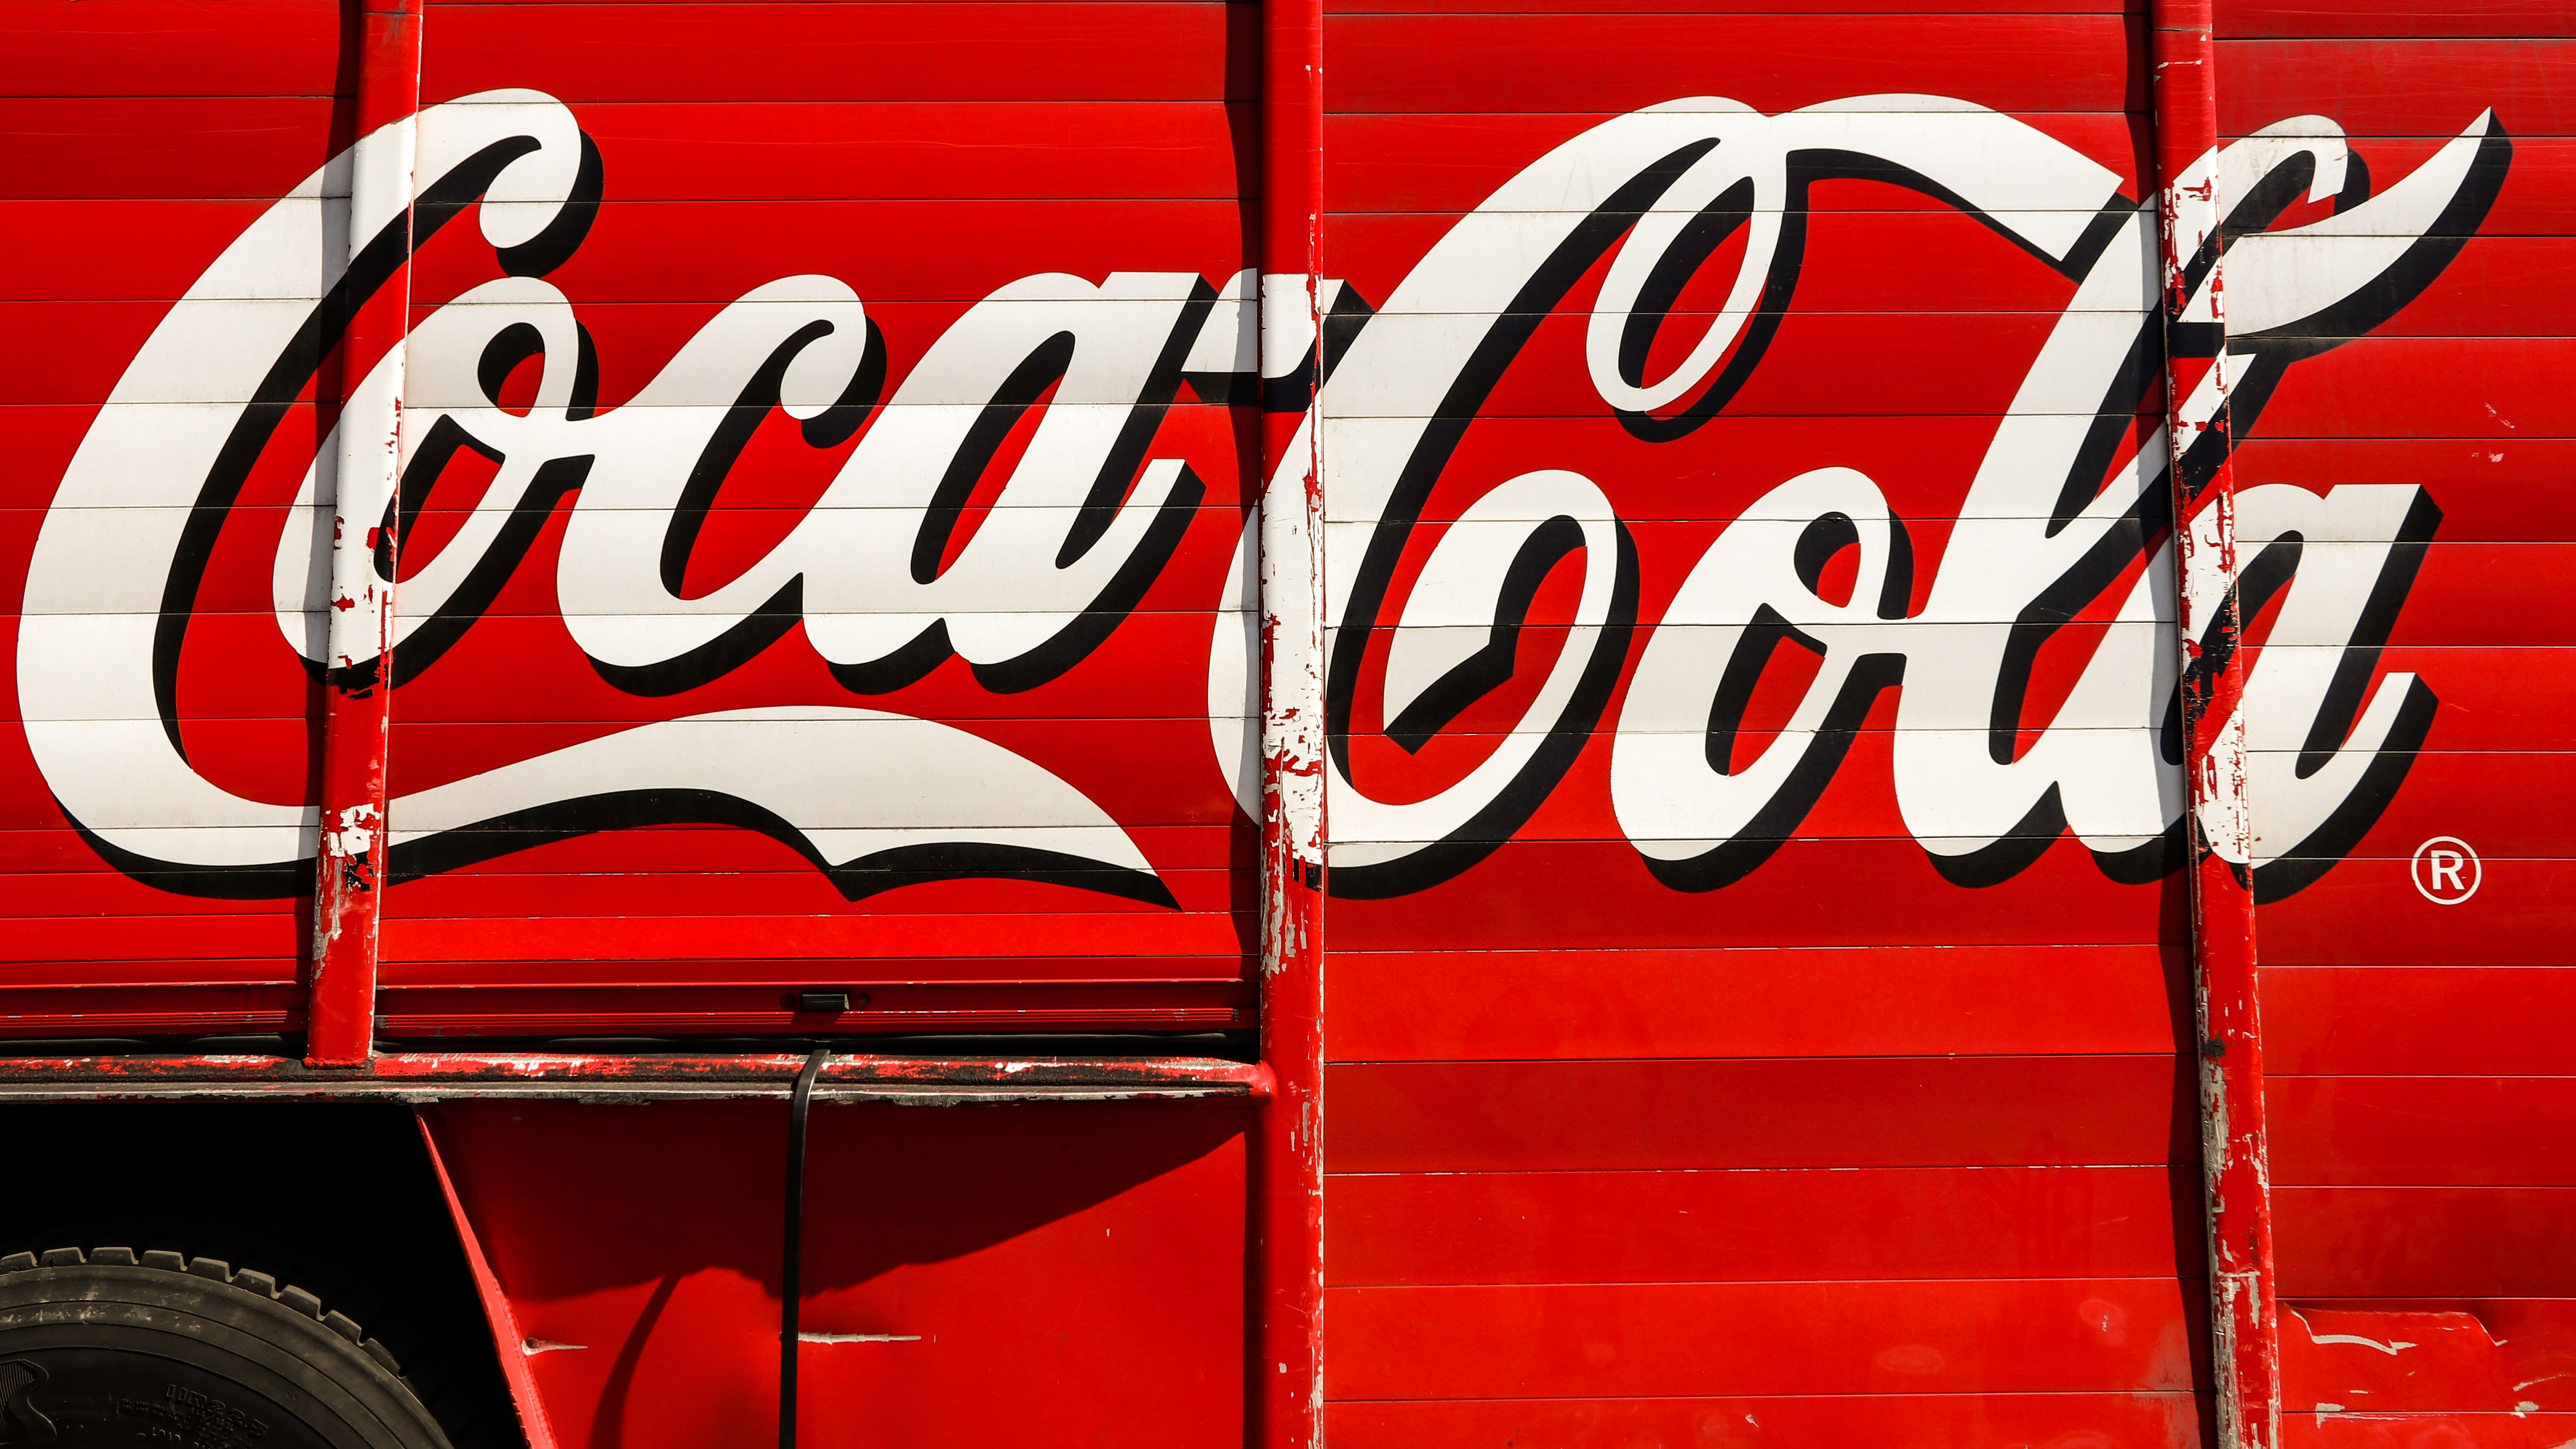 Coca-Cola's First Alcoholic Drink Since The 80s To Debut Early Next Year: CEO